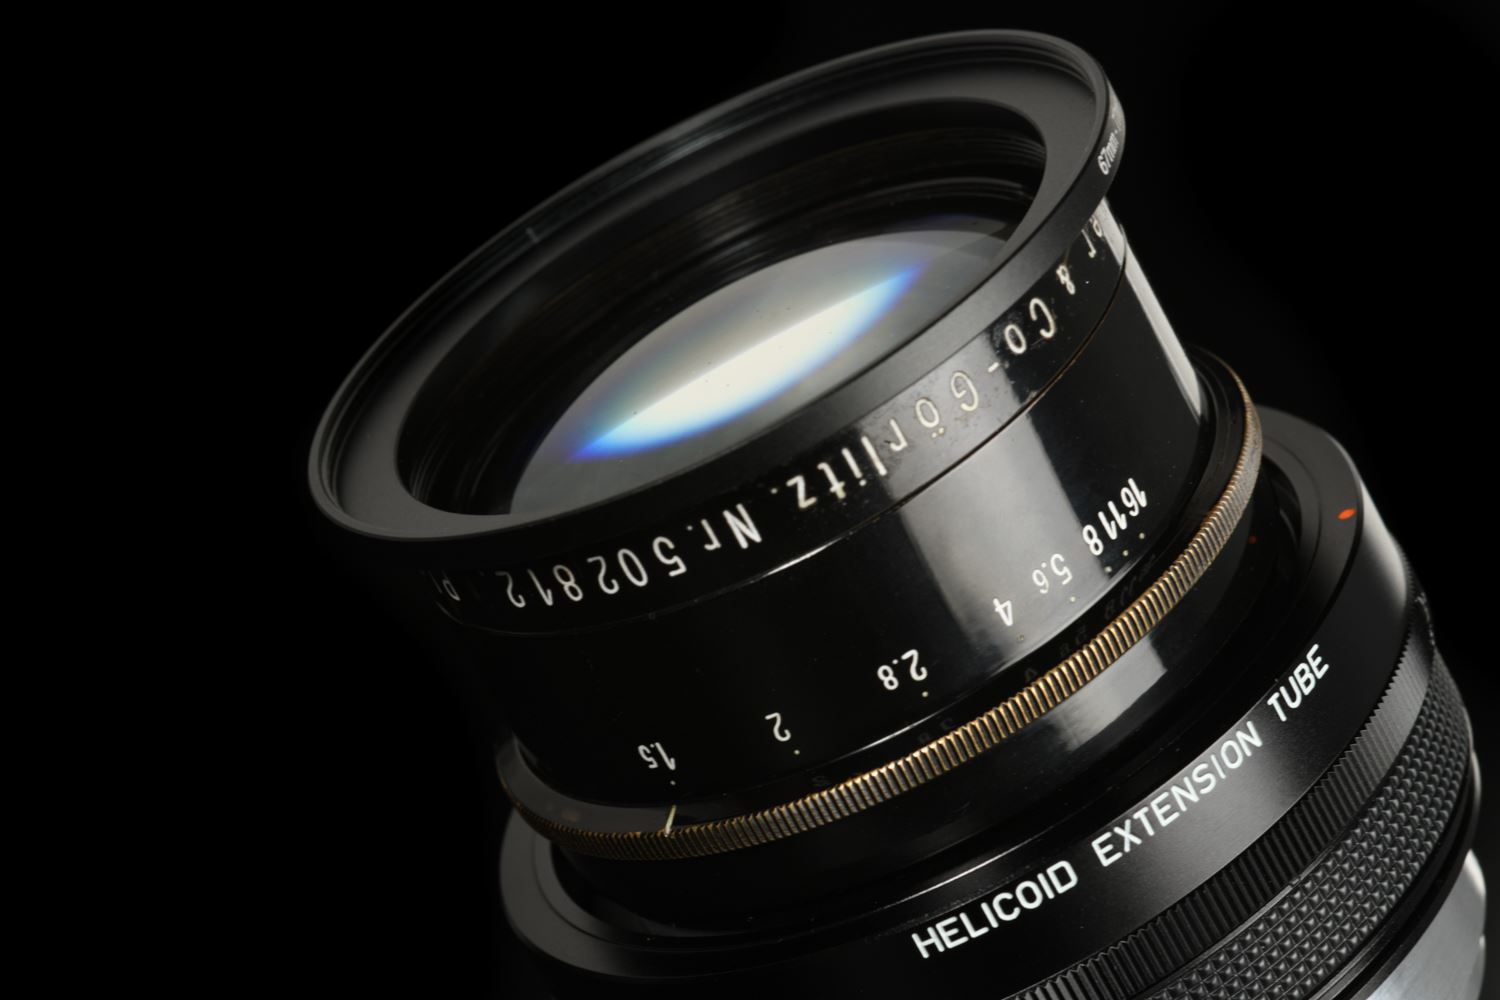 Picture of Hugo Meyer Kino-Plasmat 9cm 90mm f/1.5 Modified to Canon EOS